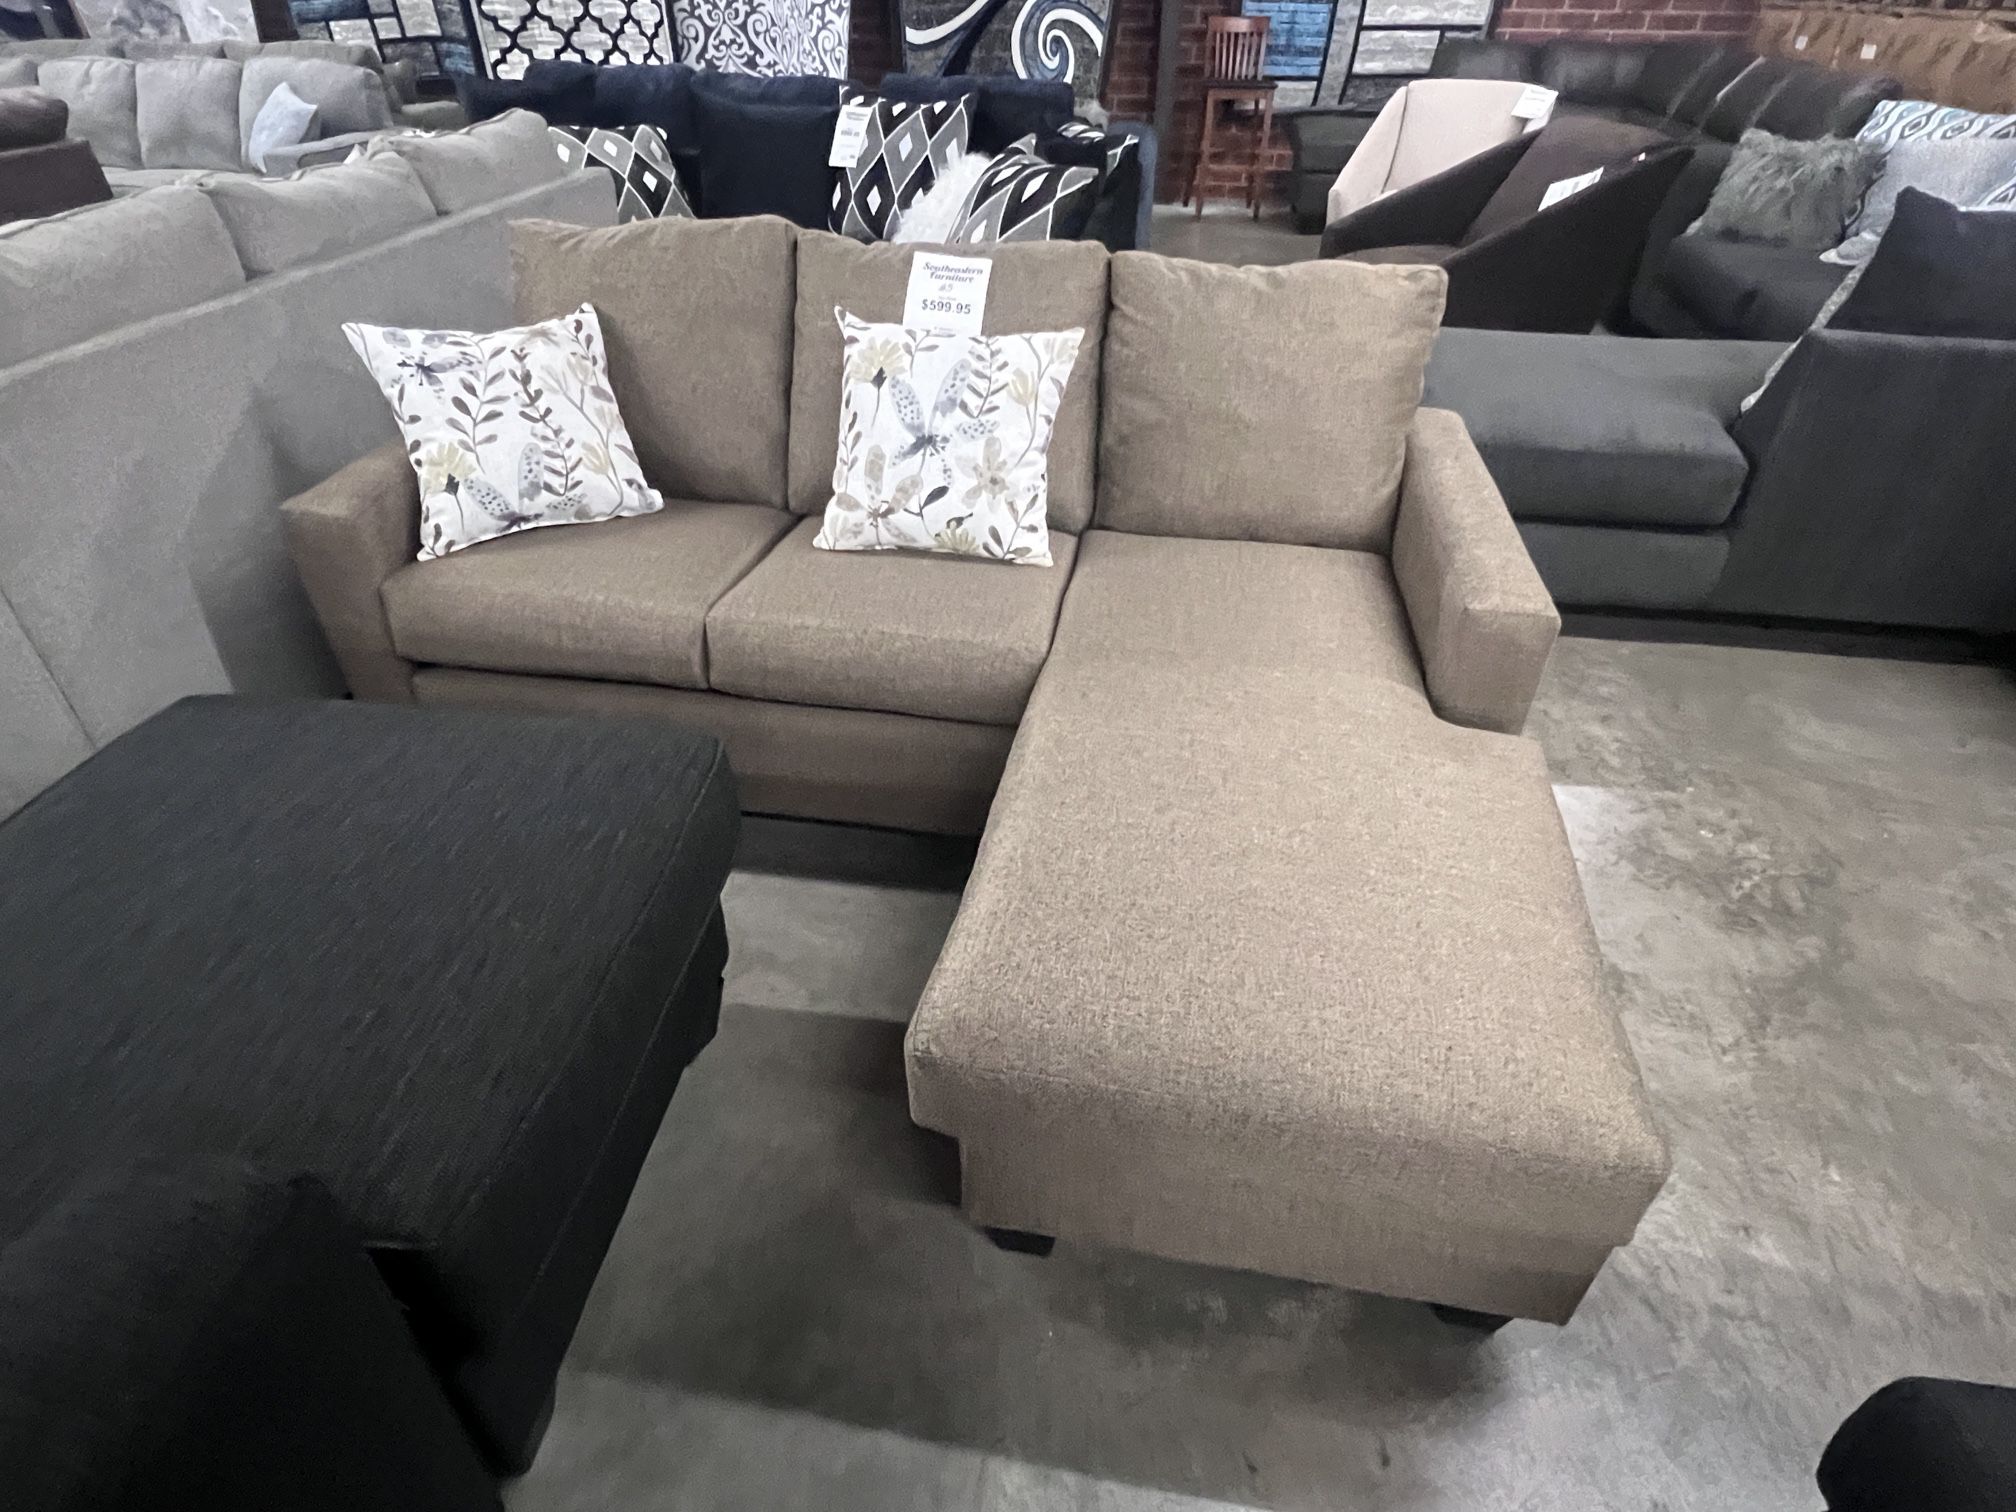 Sofa Chaise! $10.00 Down No Credit Needed Financing!